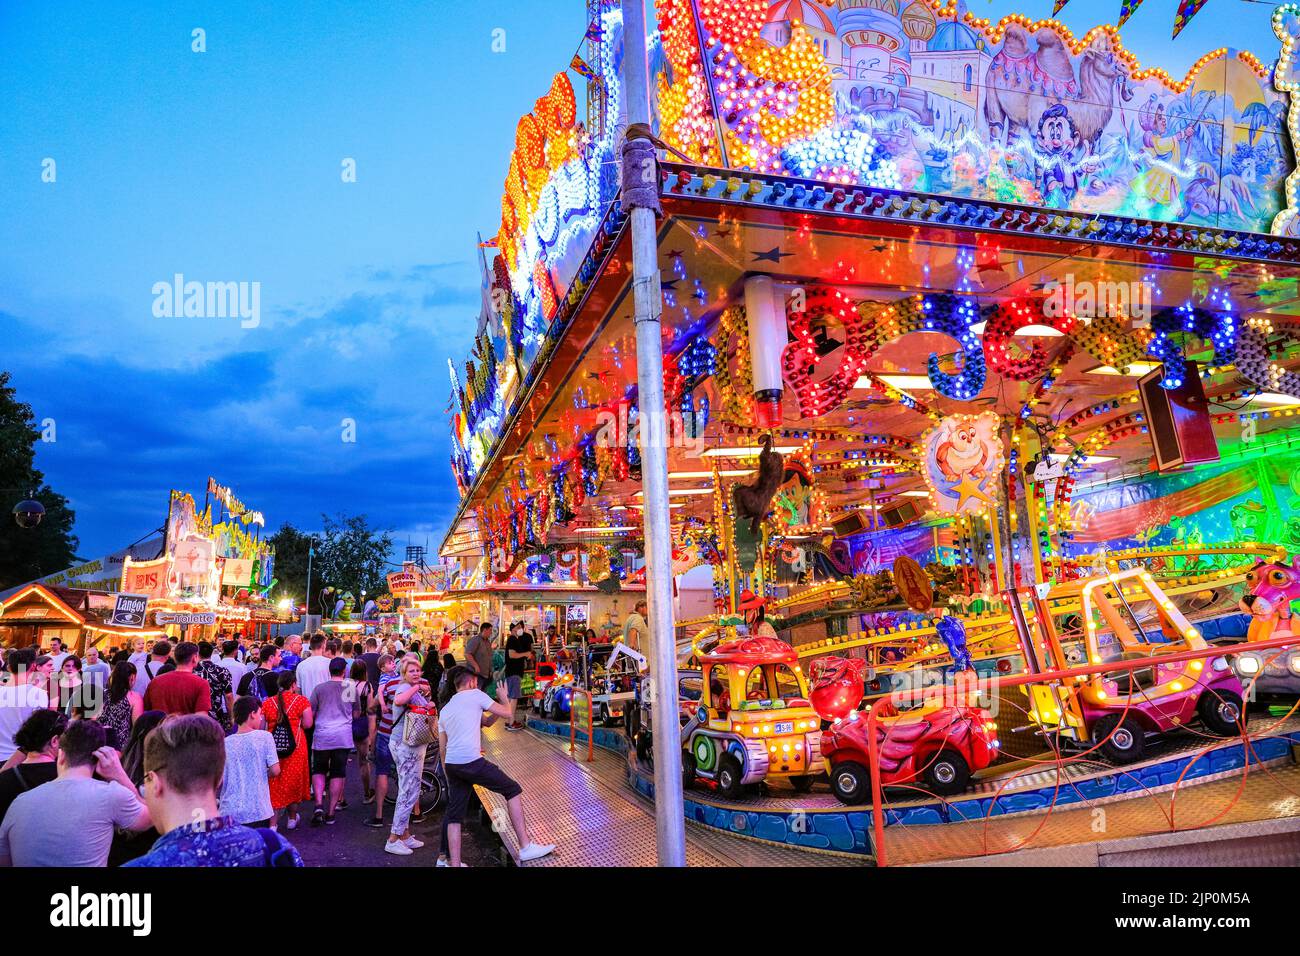 Herne, NRW, Germany. 14th Aug, 2022. The fair becomes more crowded towards the eve as temperatures drop slightly. Cranger Kirmes, Germany's 3rd largest funfair with a tradition dating back to the middle ages, has returned to pre-pandemic visitor numbers with more than 3.9m attending in hot, sunny weather, enjoying the rides, rollercoasters, beer halls, food and drink. The funfair concluded tonight with fireworks over the nearby Rhine-Herne Canal. Credit: Imageplotter/Alamy Live News Stock Photo